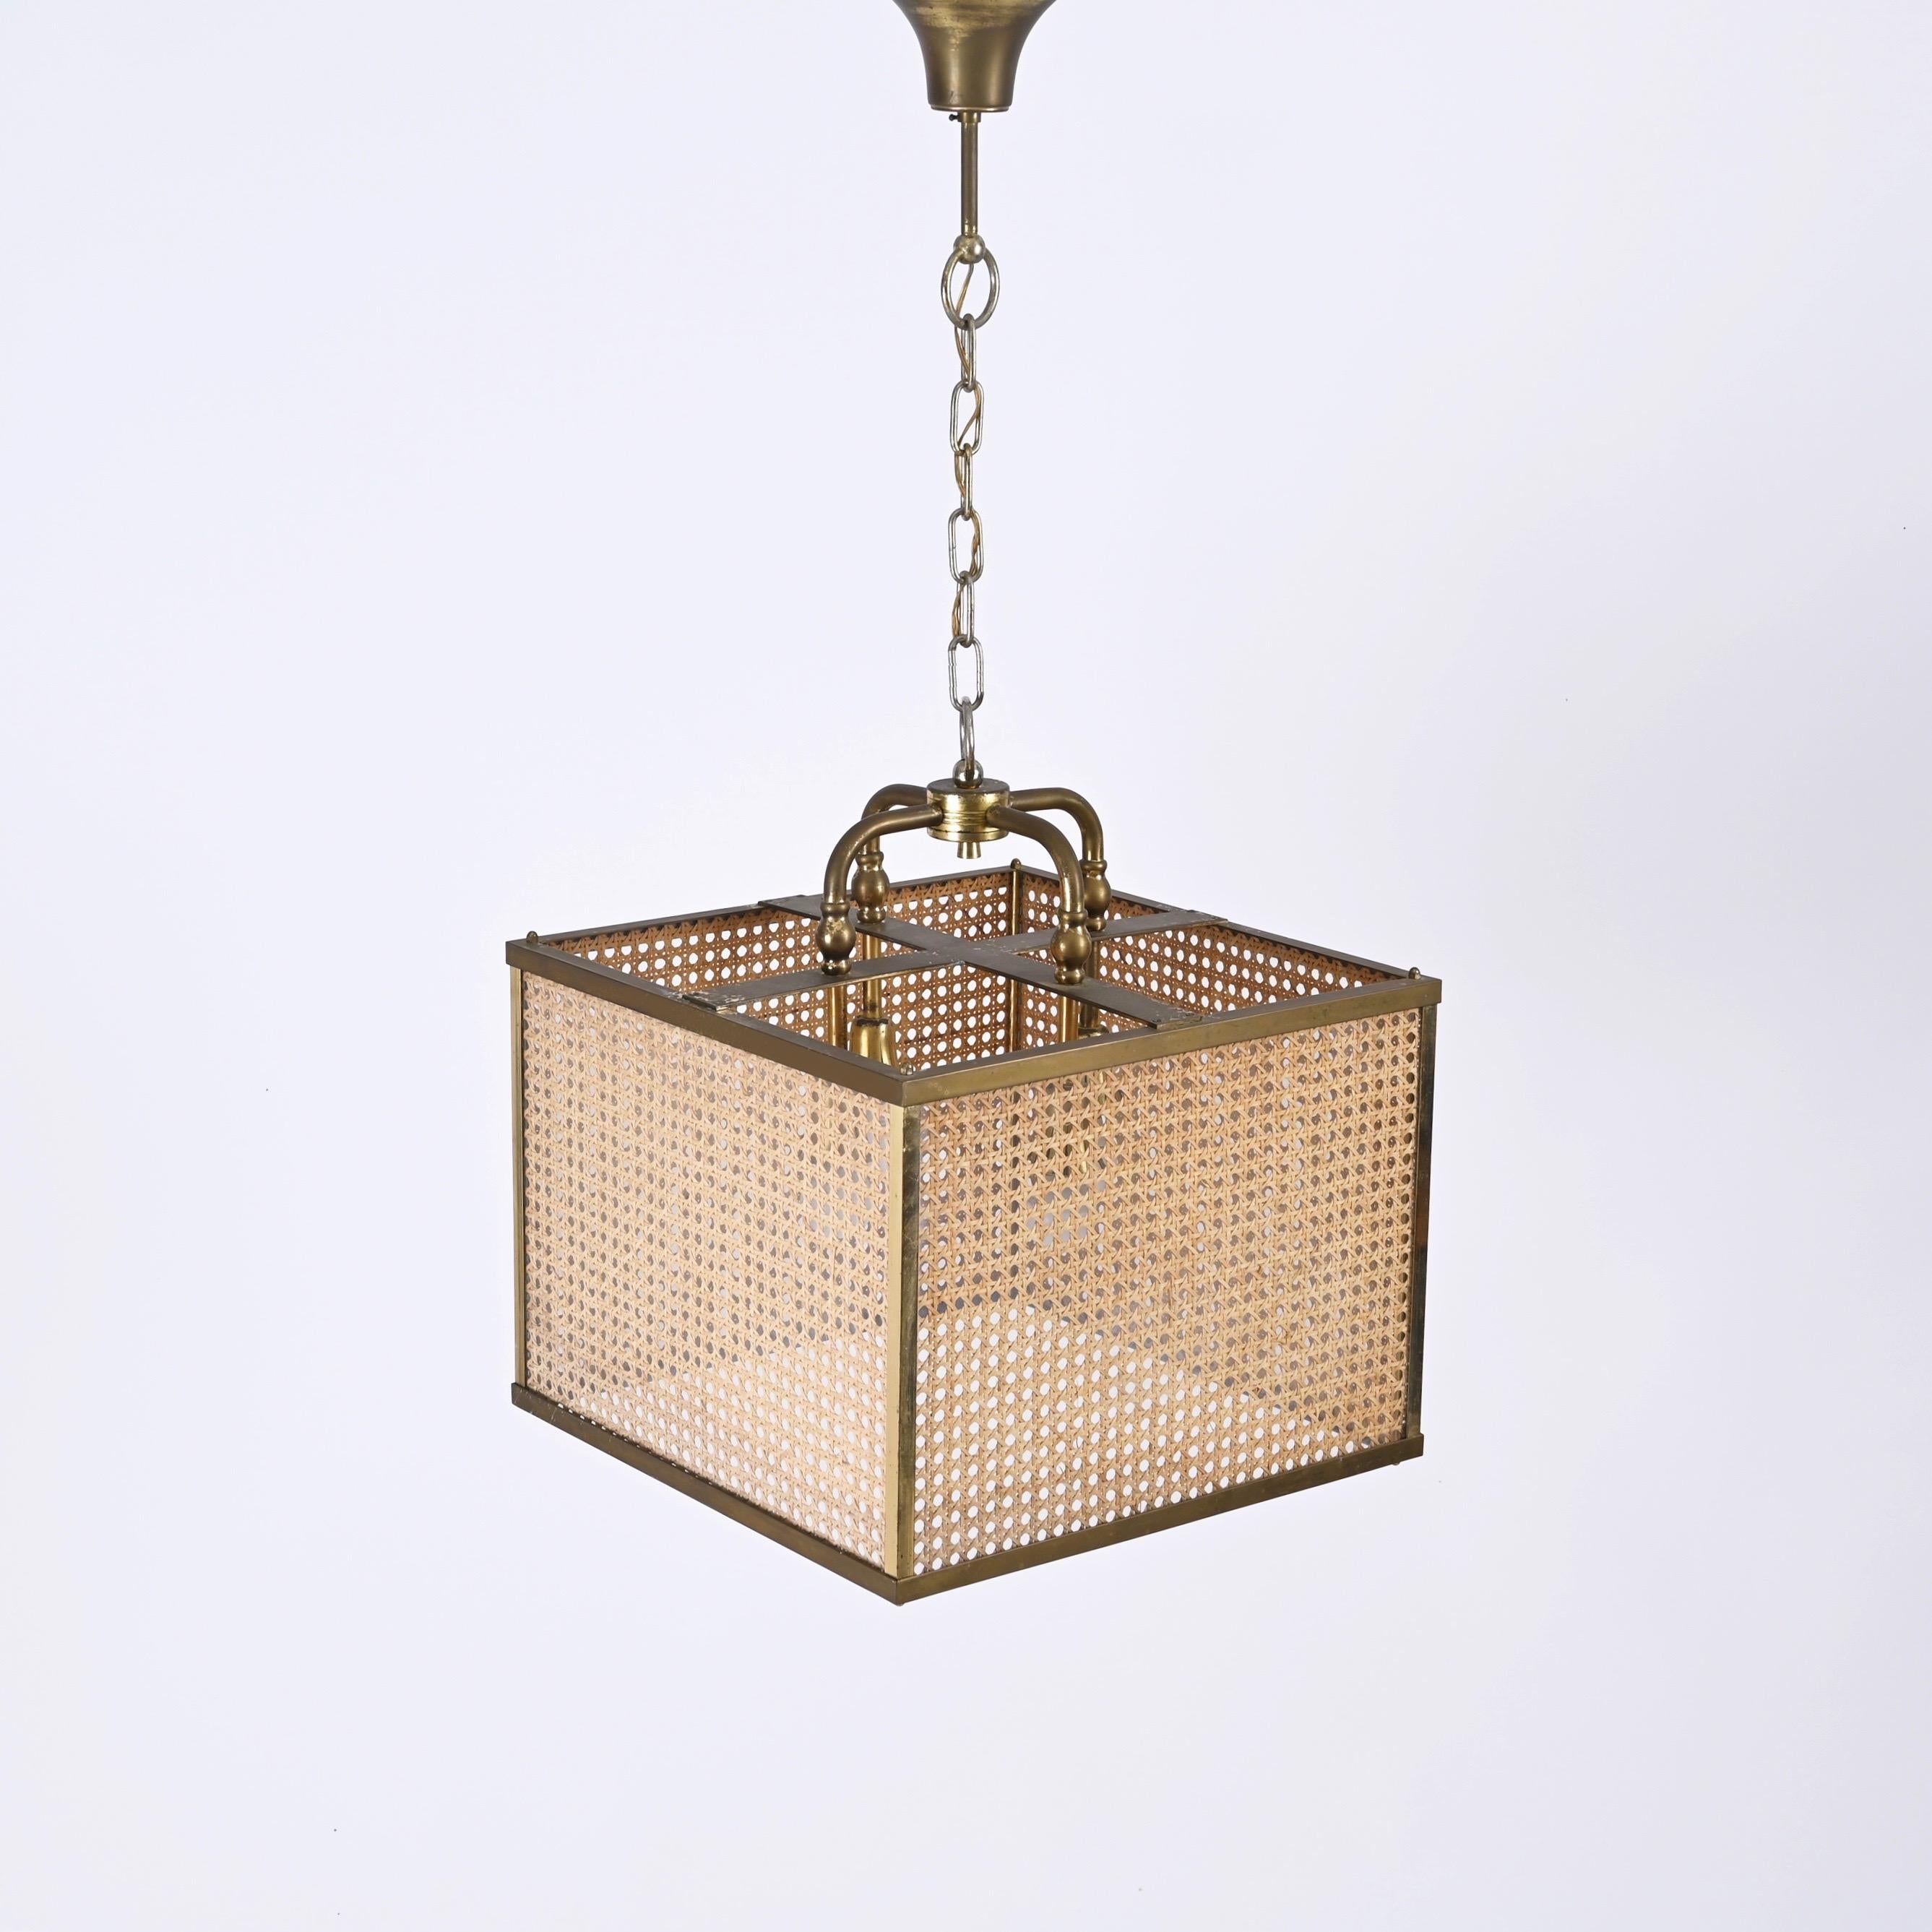 Brass, Vienna Straw Wicker and Glass Square Chandelier Lamp, Italy, 1950s For Sale 4